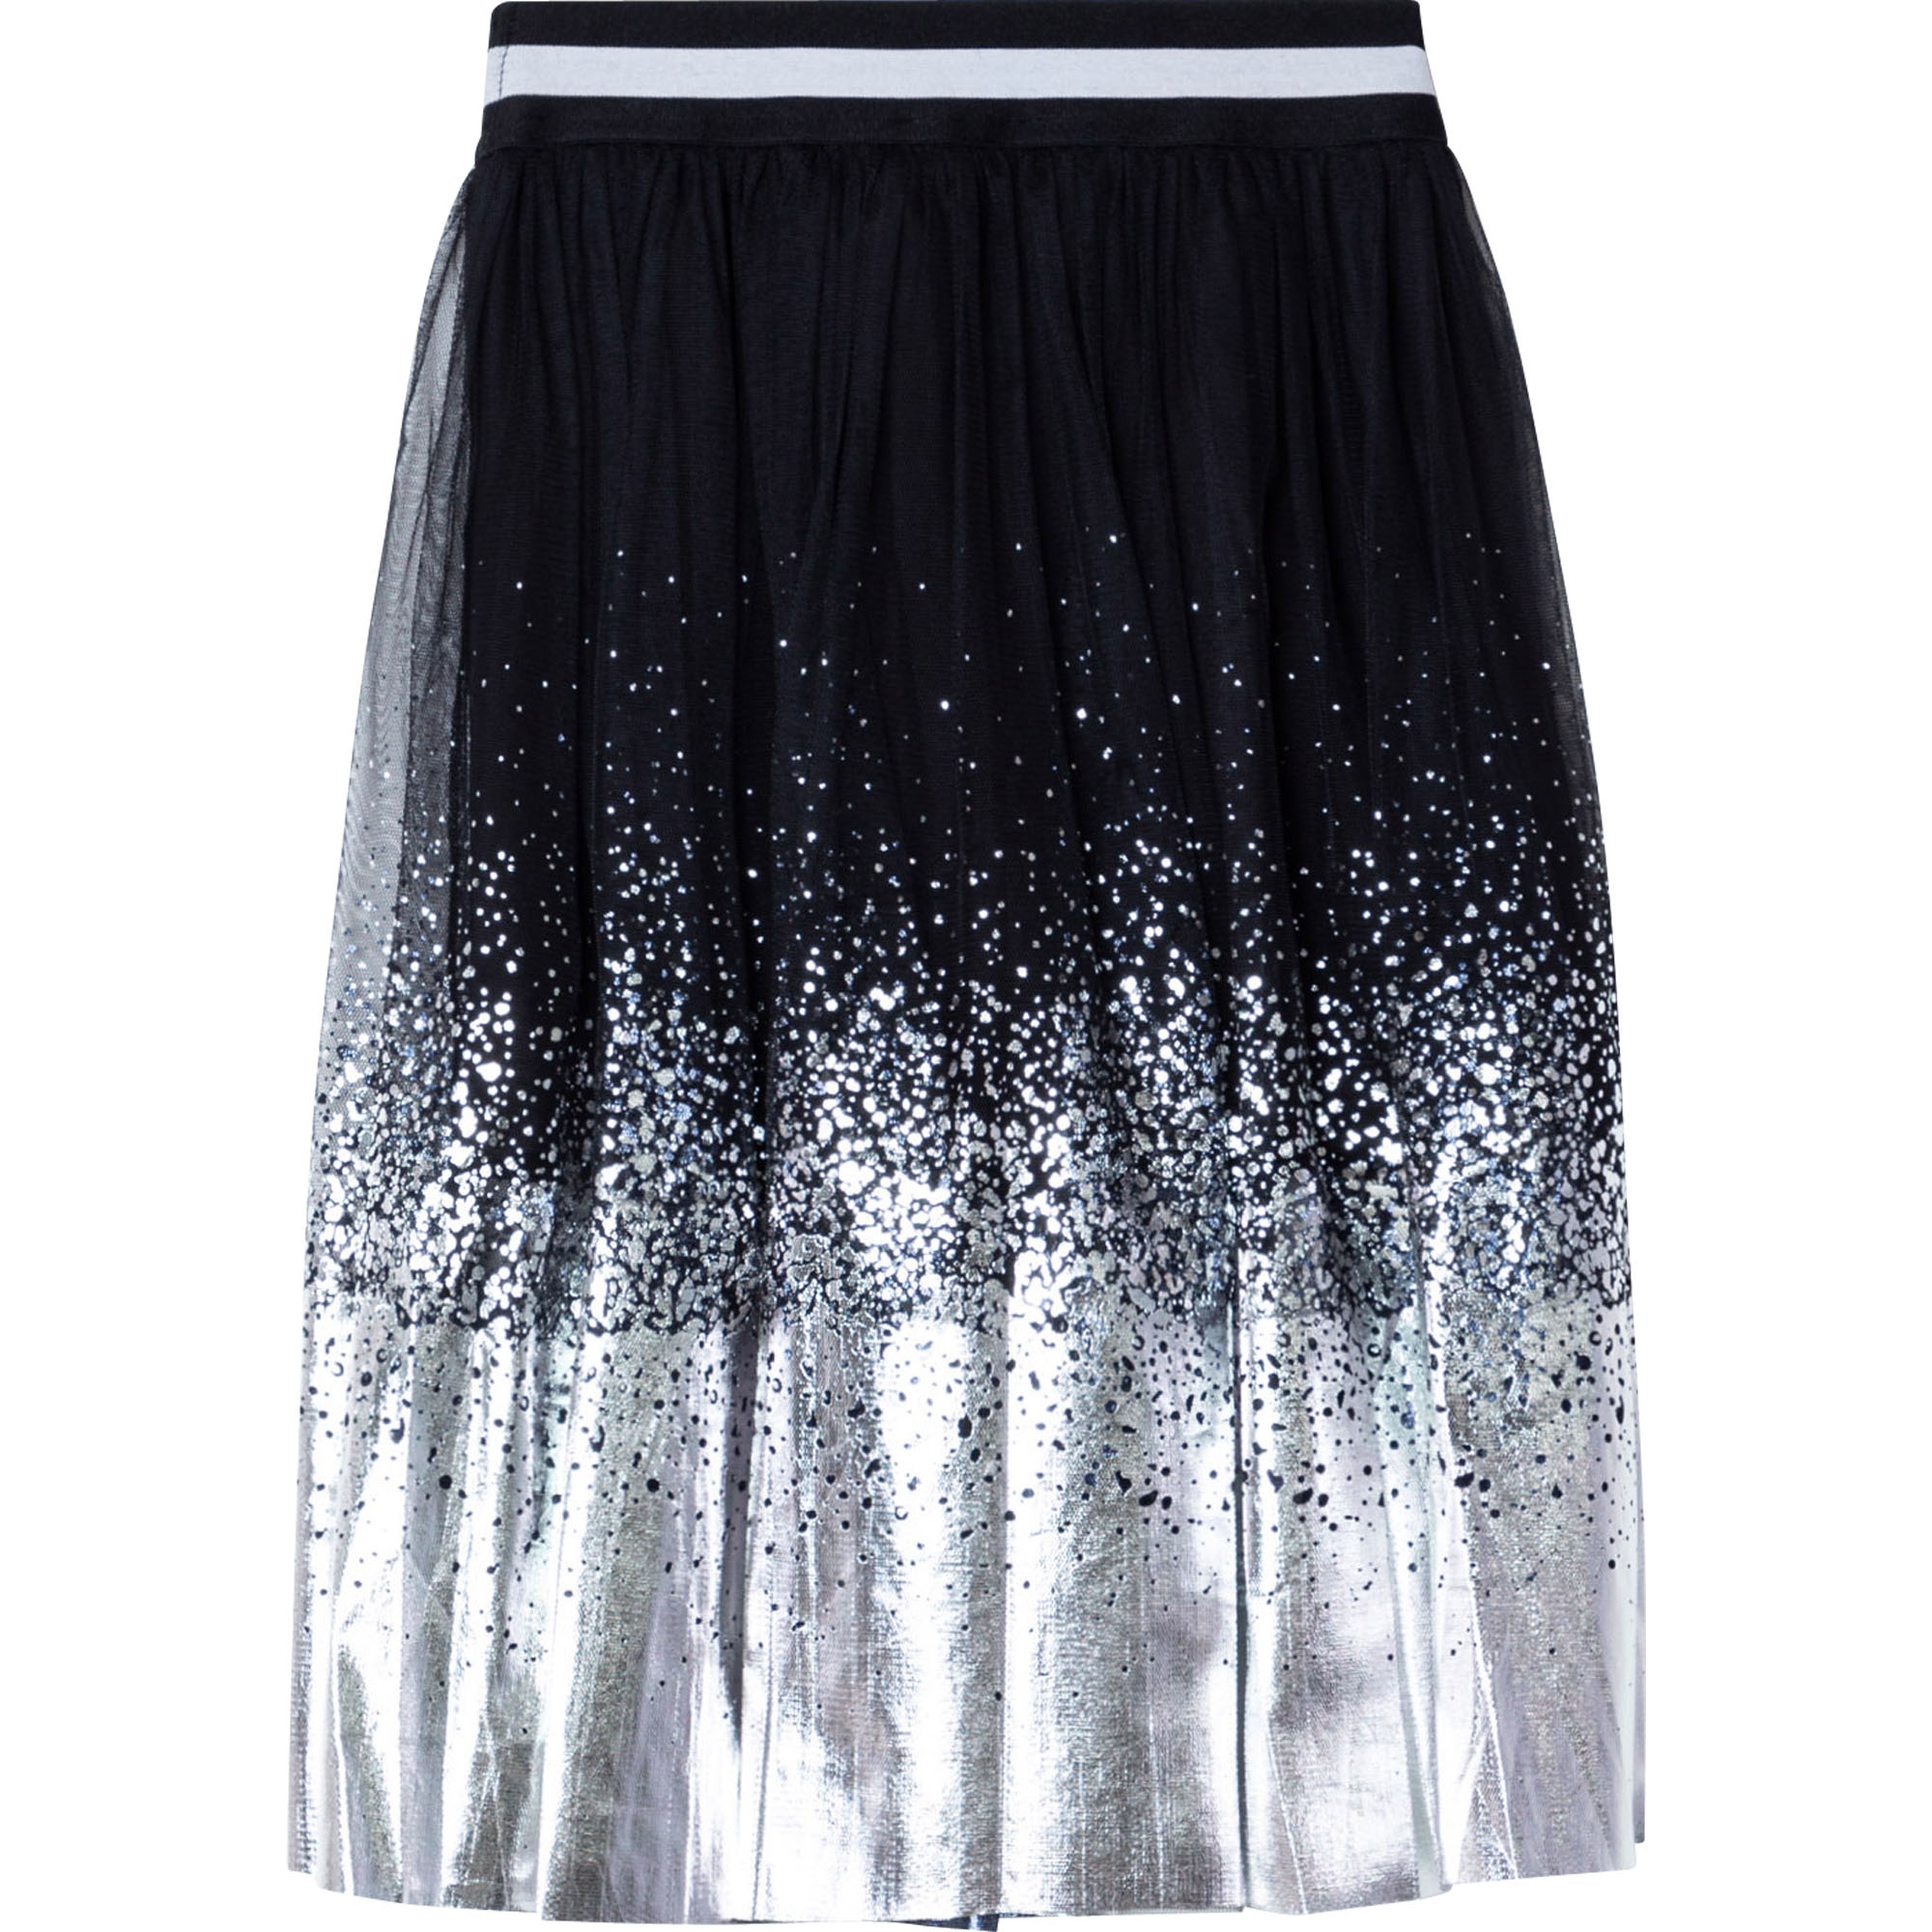 Gonna in tulle con stampa DKNY Per BAMBINA